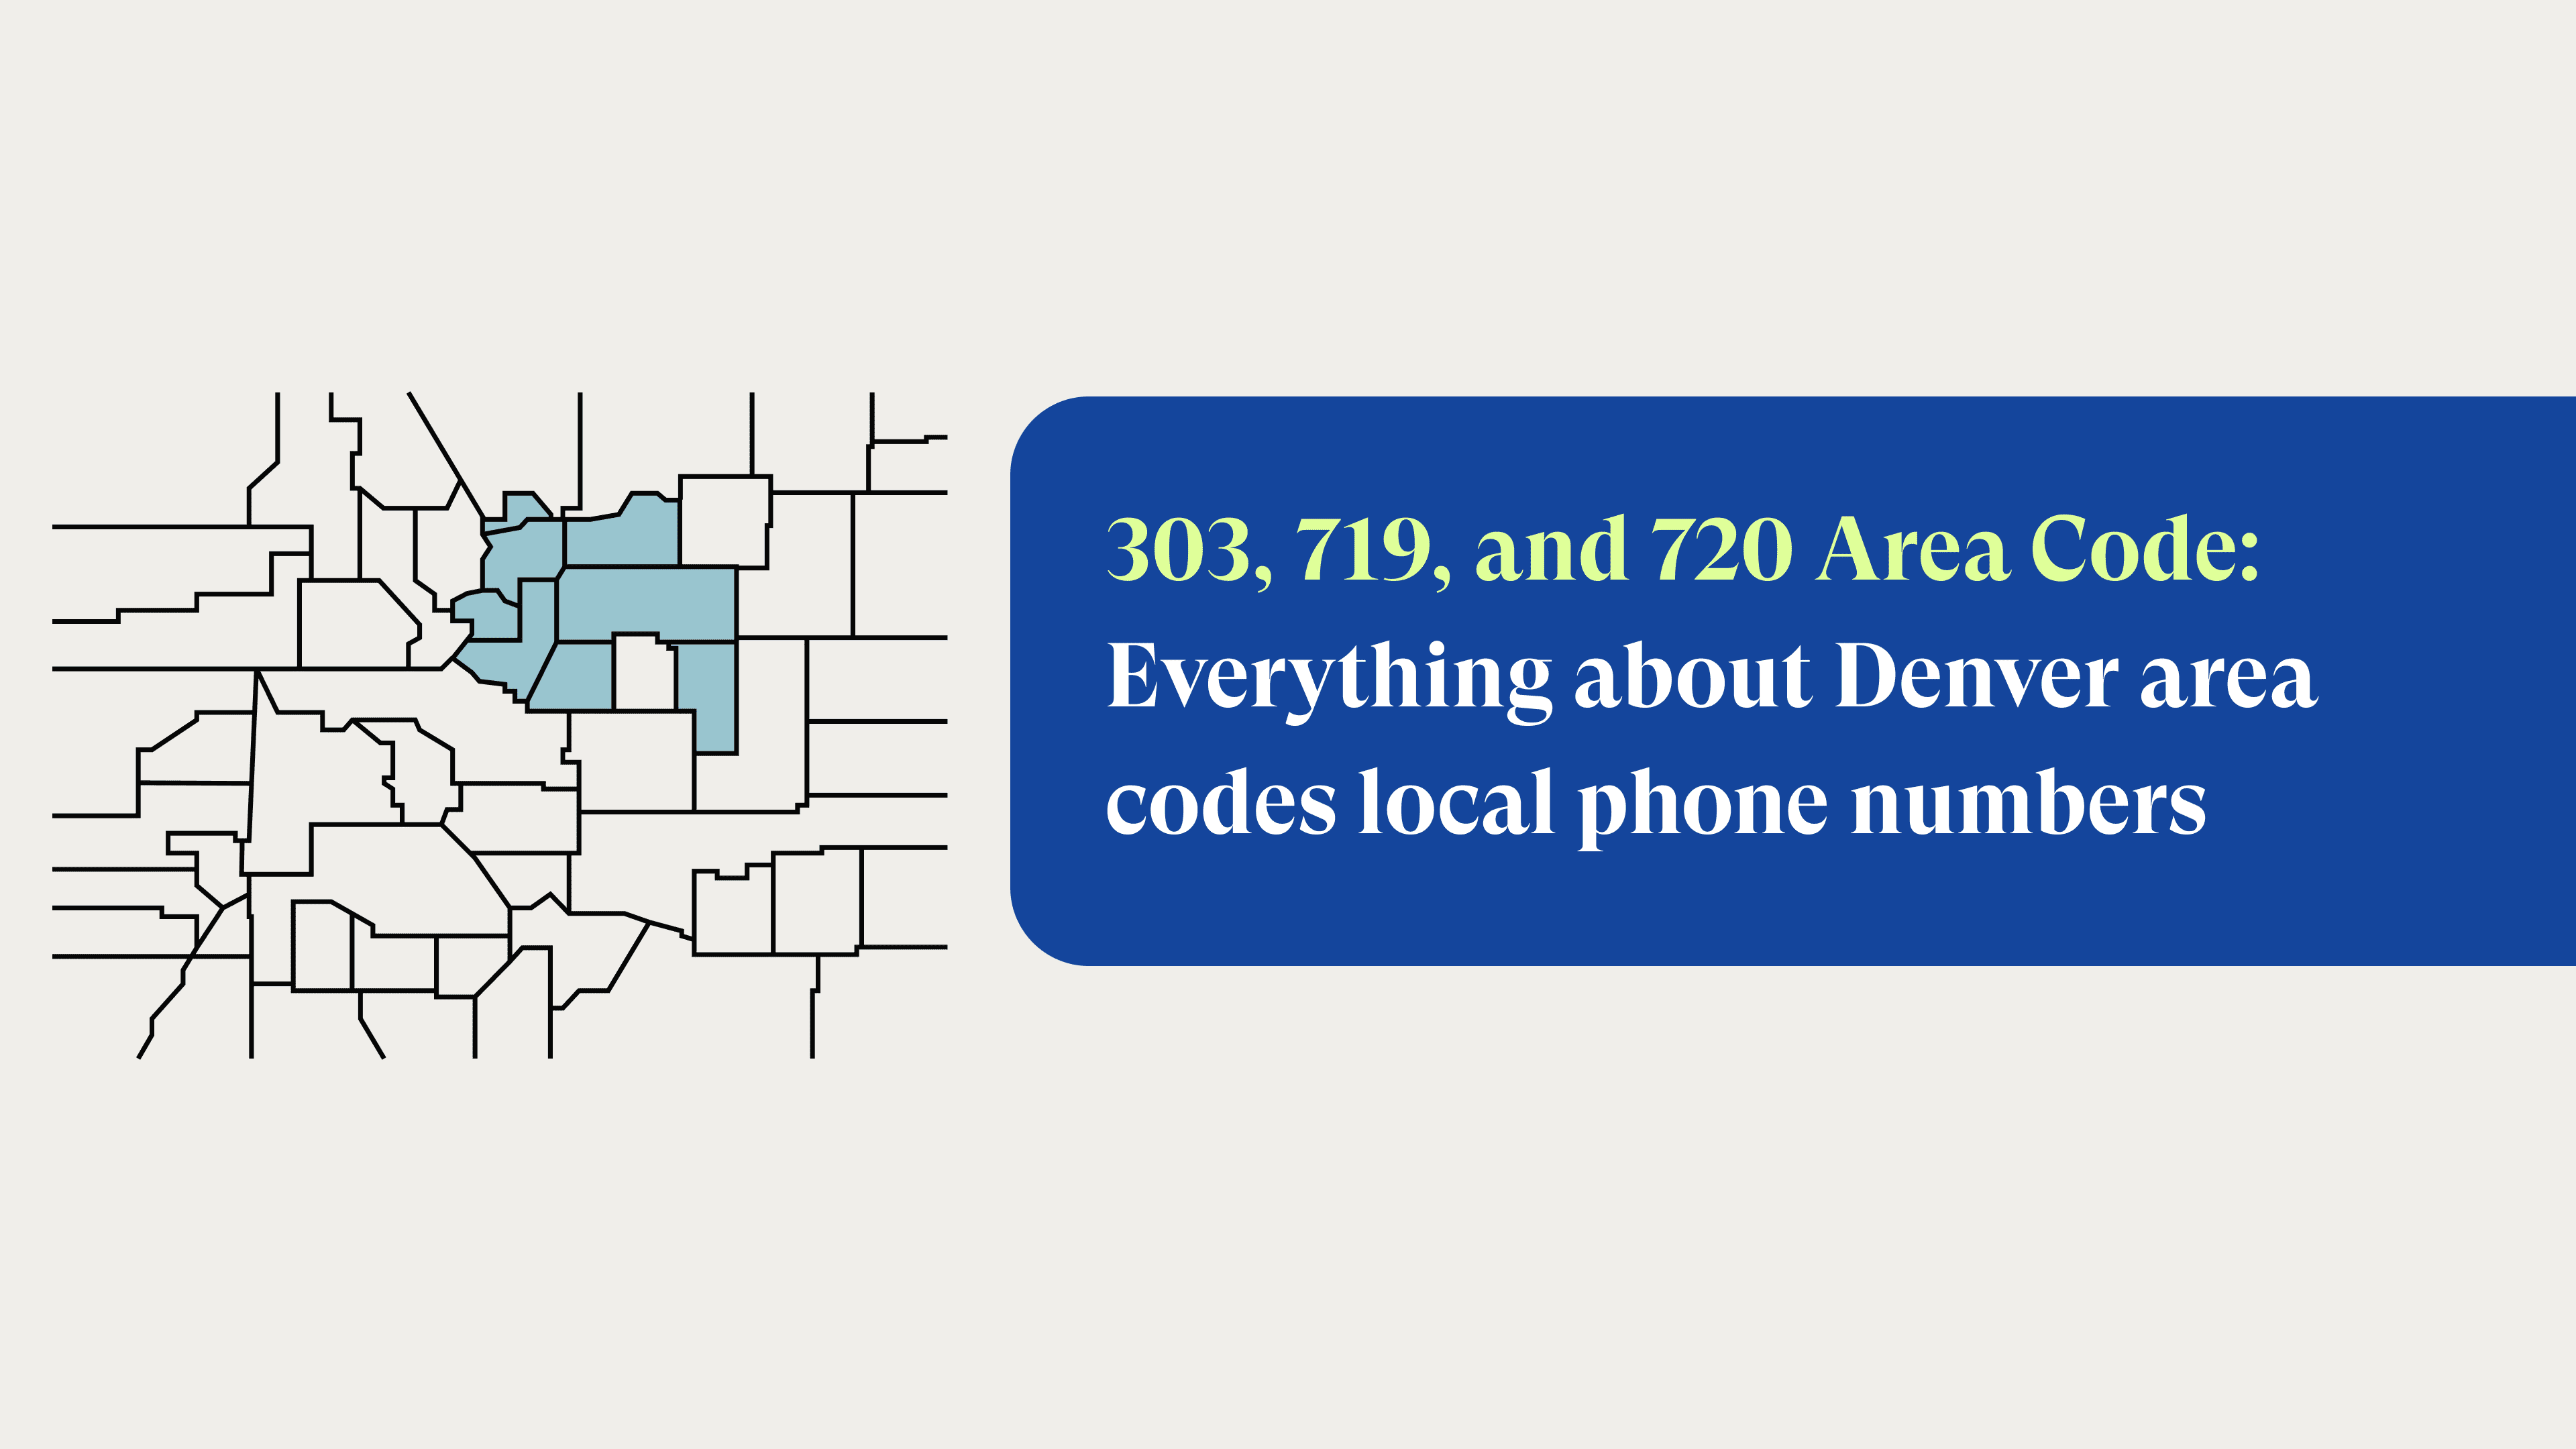 303, 719, and 720 Area Code: Denver area codes local phone